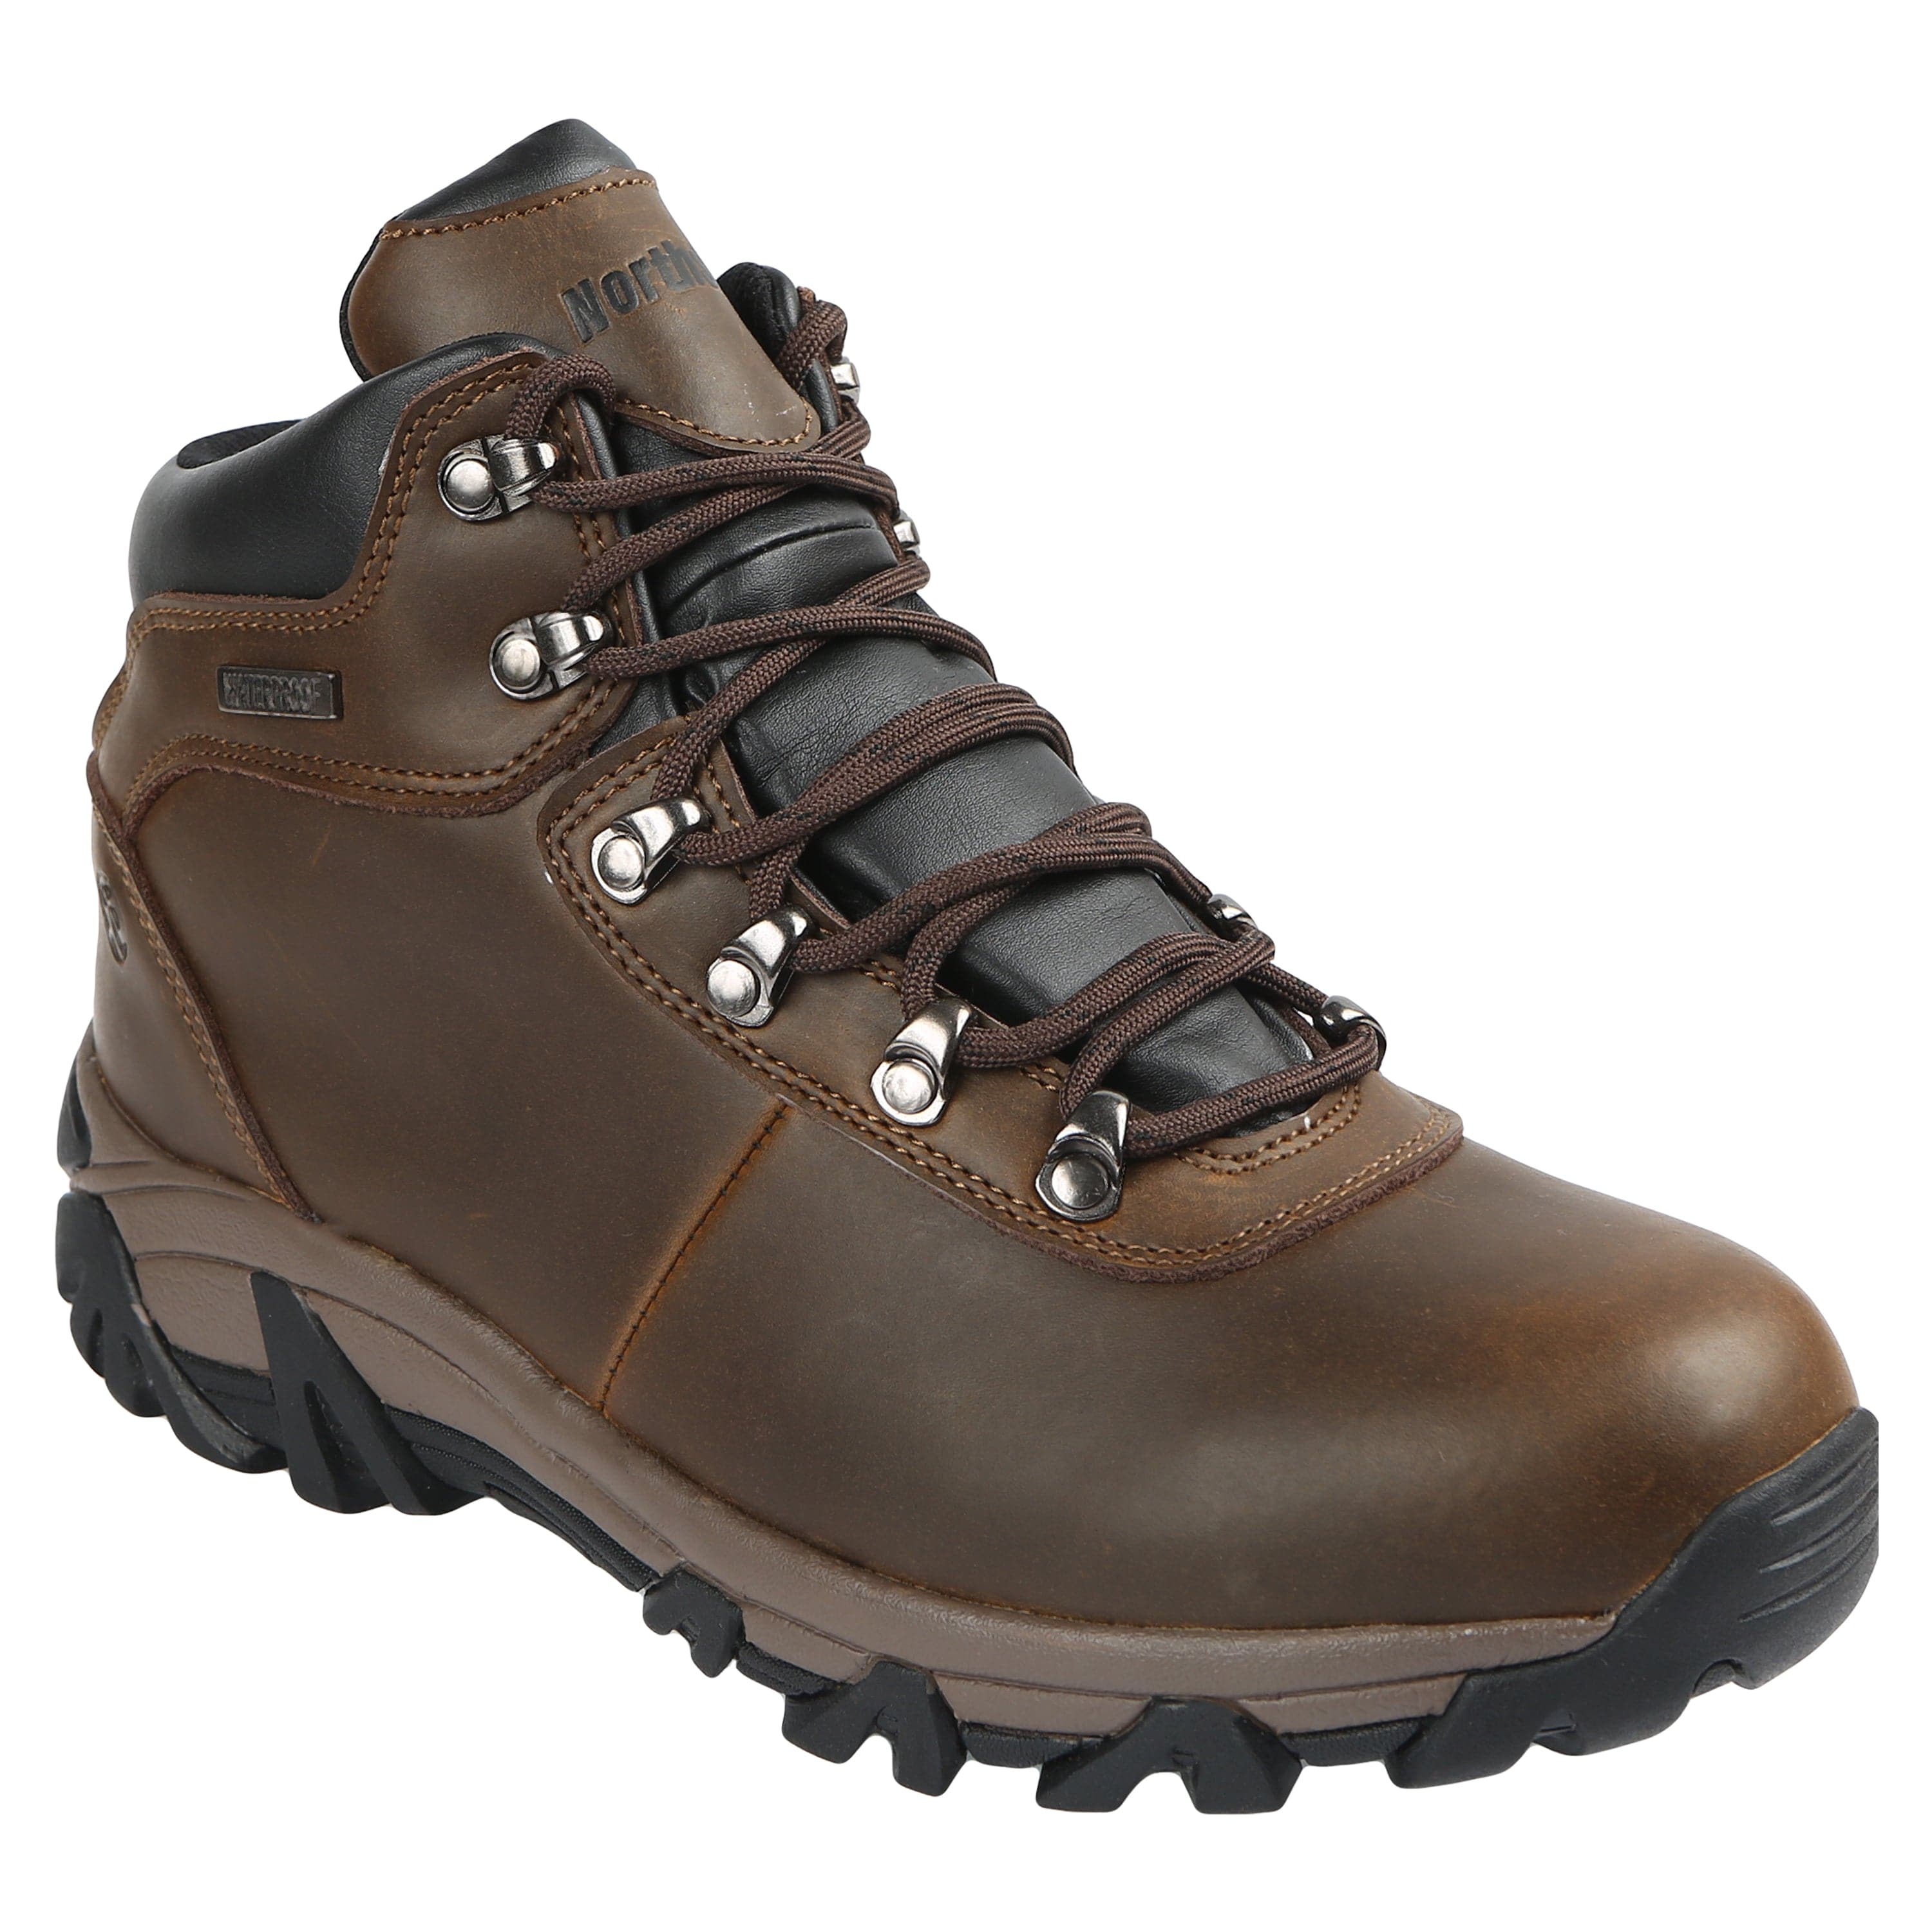 Mens hiking boots